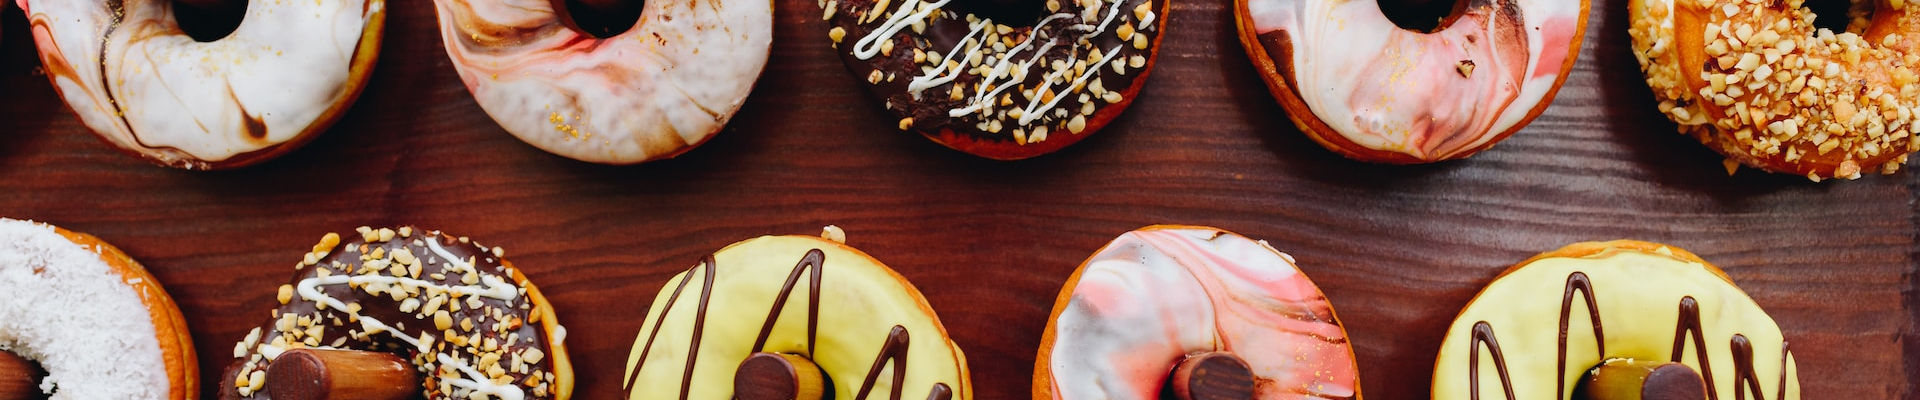 An image of some doughnuts